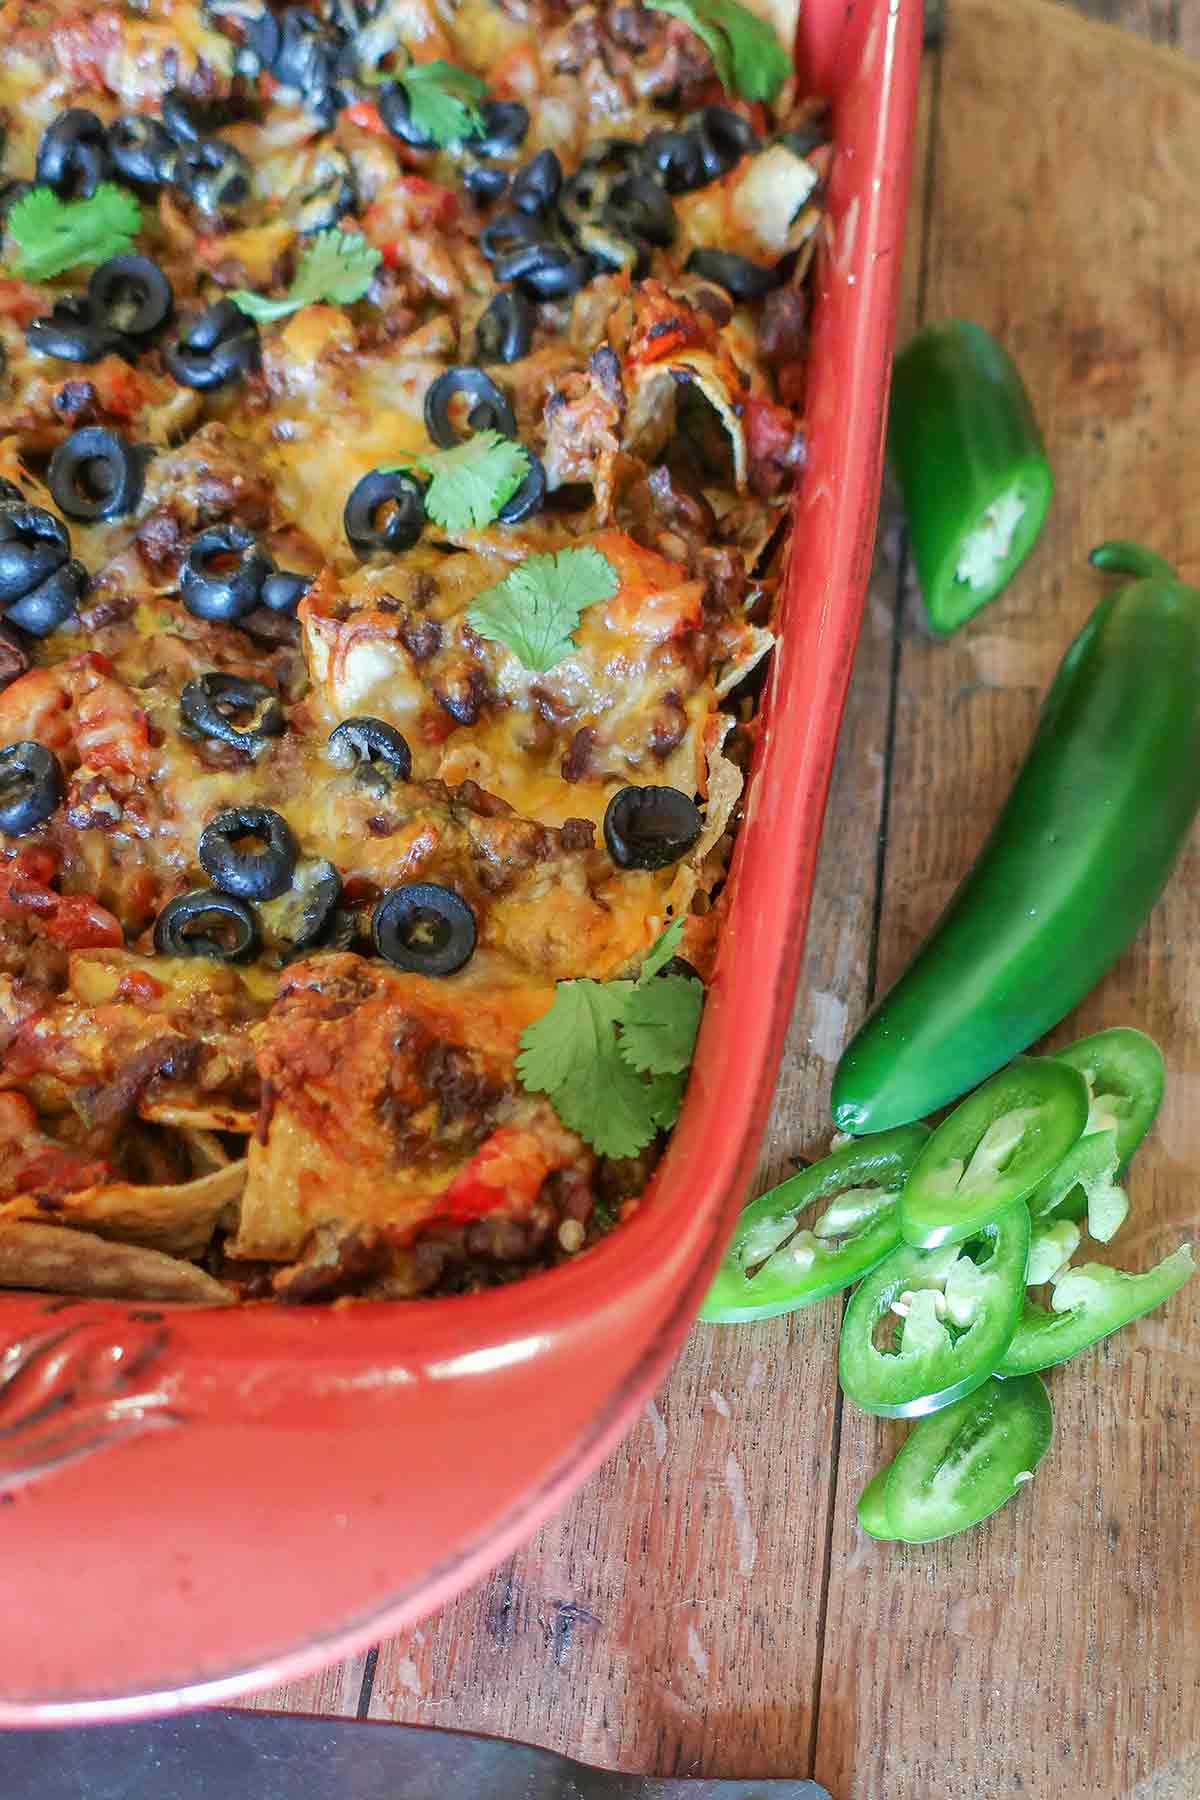 nacho casserole showing topping of melted cheese, olives, jalapenos and cilantro